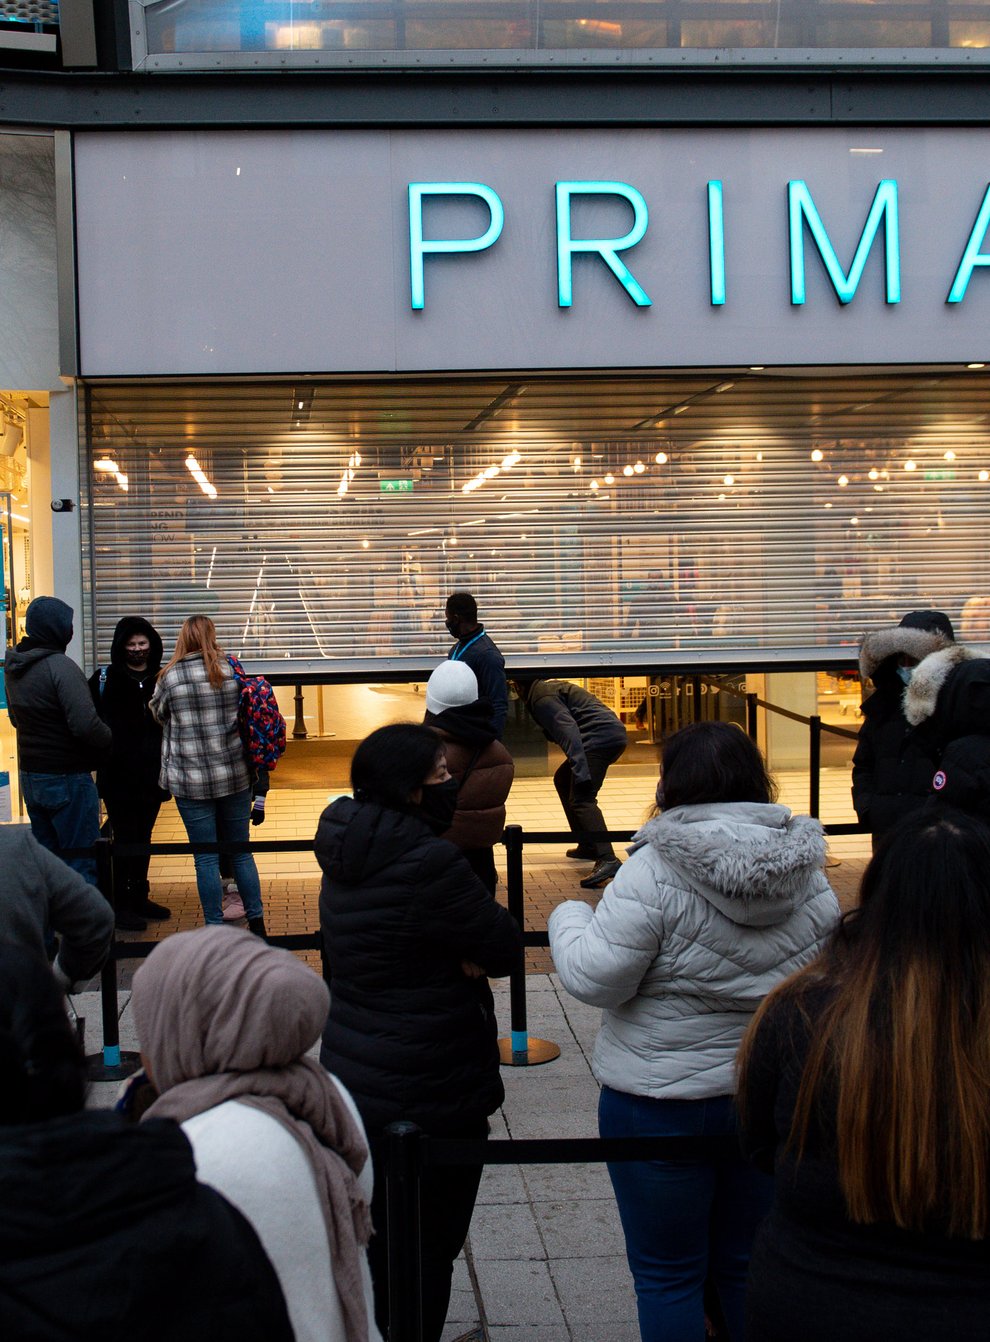 Latest Primark sales were below expectations after a dip in recent footfall (Jacob King/PA)